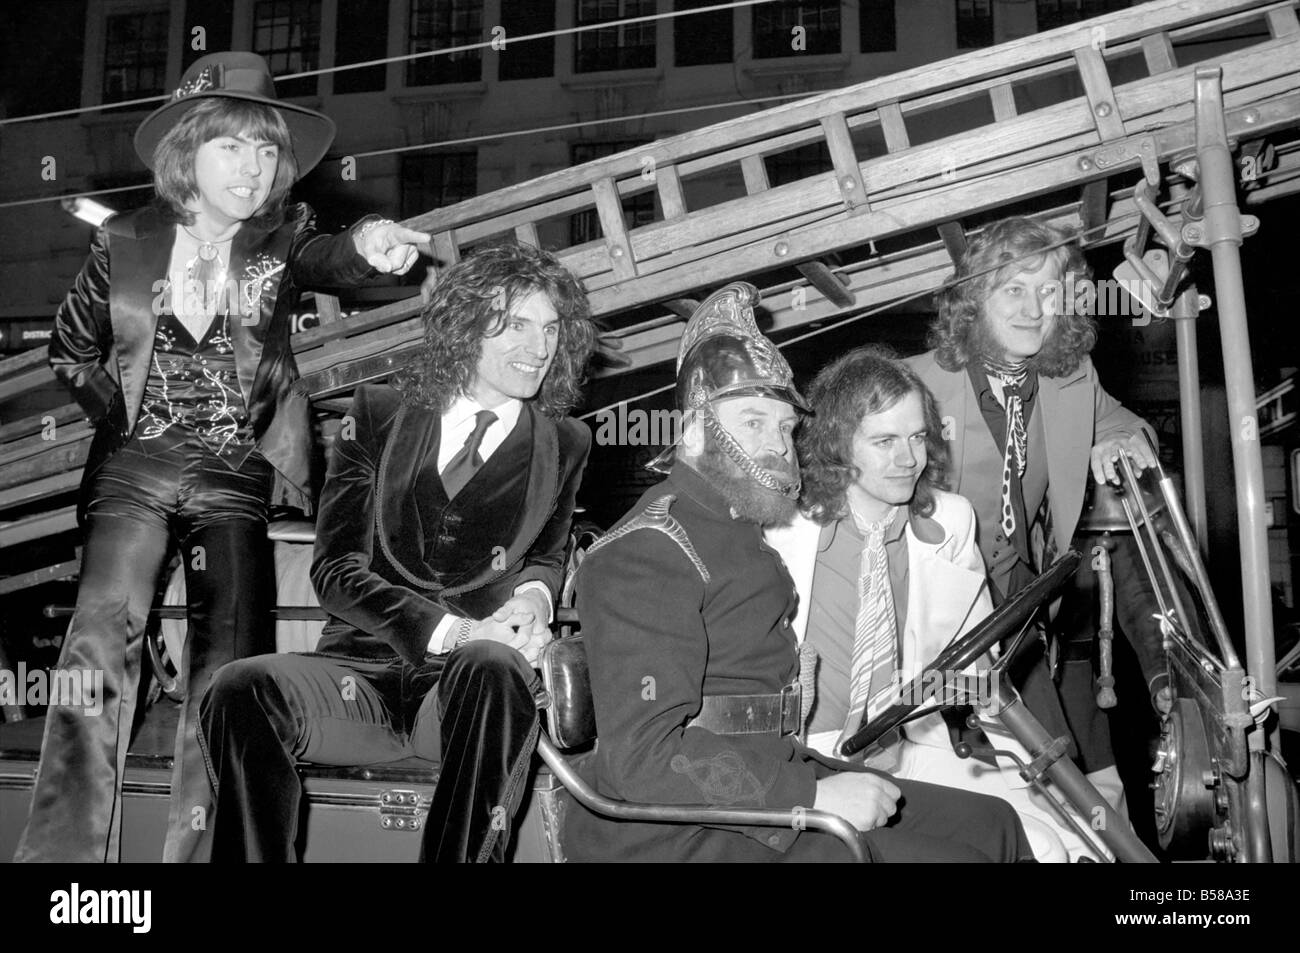 The Slade pop group on fire engine. L to R Dave Hill, Don Powell, Jimmy Lea, Noddy Holder. February 1975 75-00872-002 Stock Photo